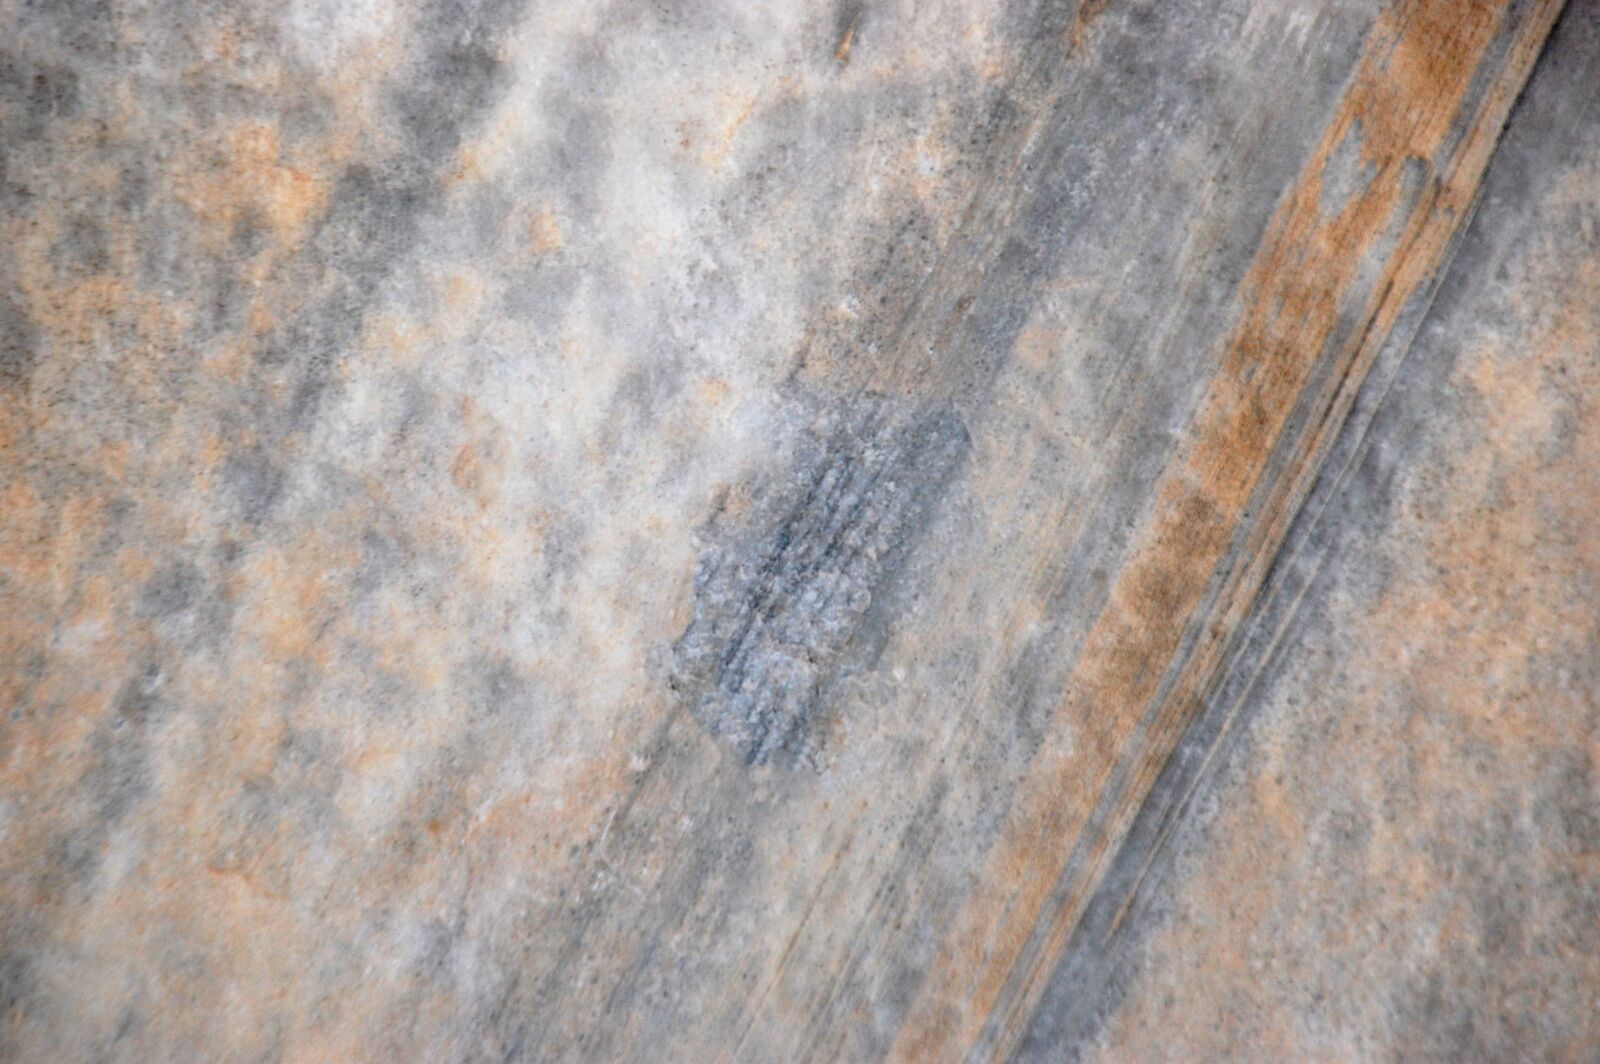 Tamron AF 18-270mm F3.5-6.3 Di II VC LD Aspherical (IF) MACRO sample photo. Natural stone, raw marble photography